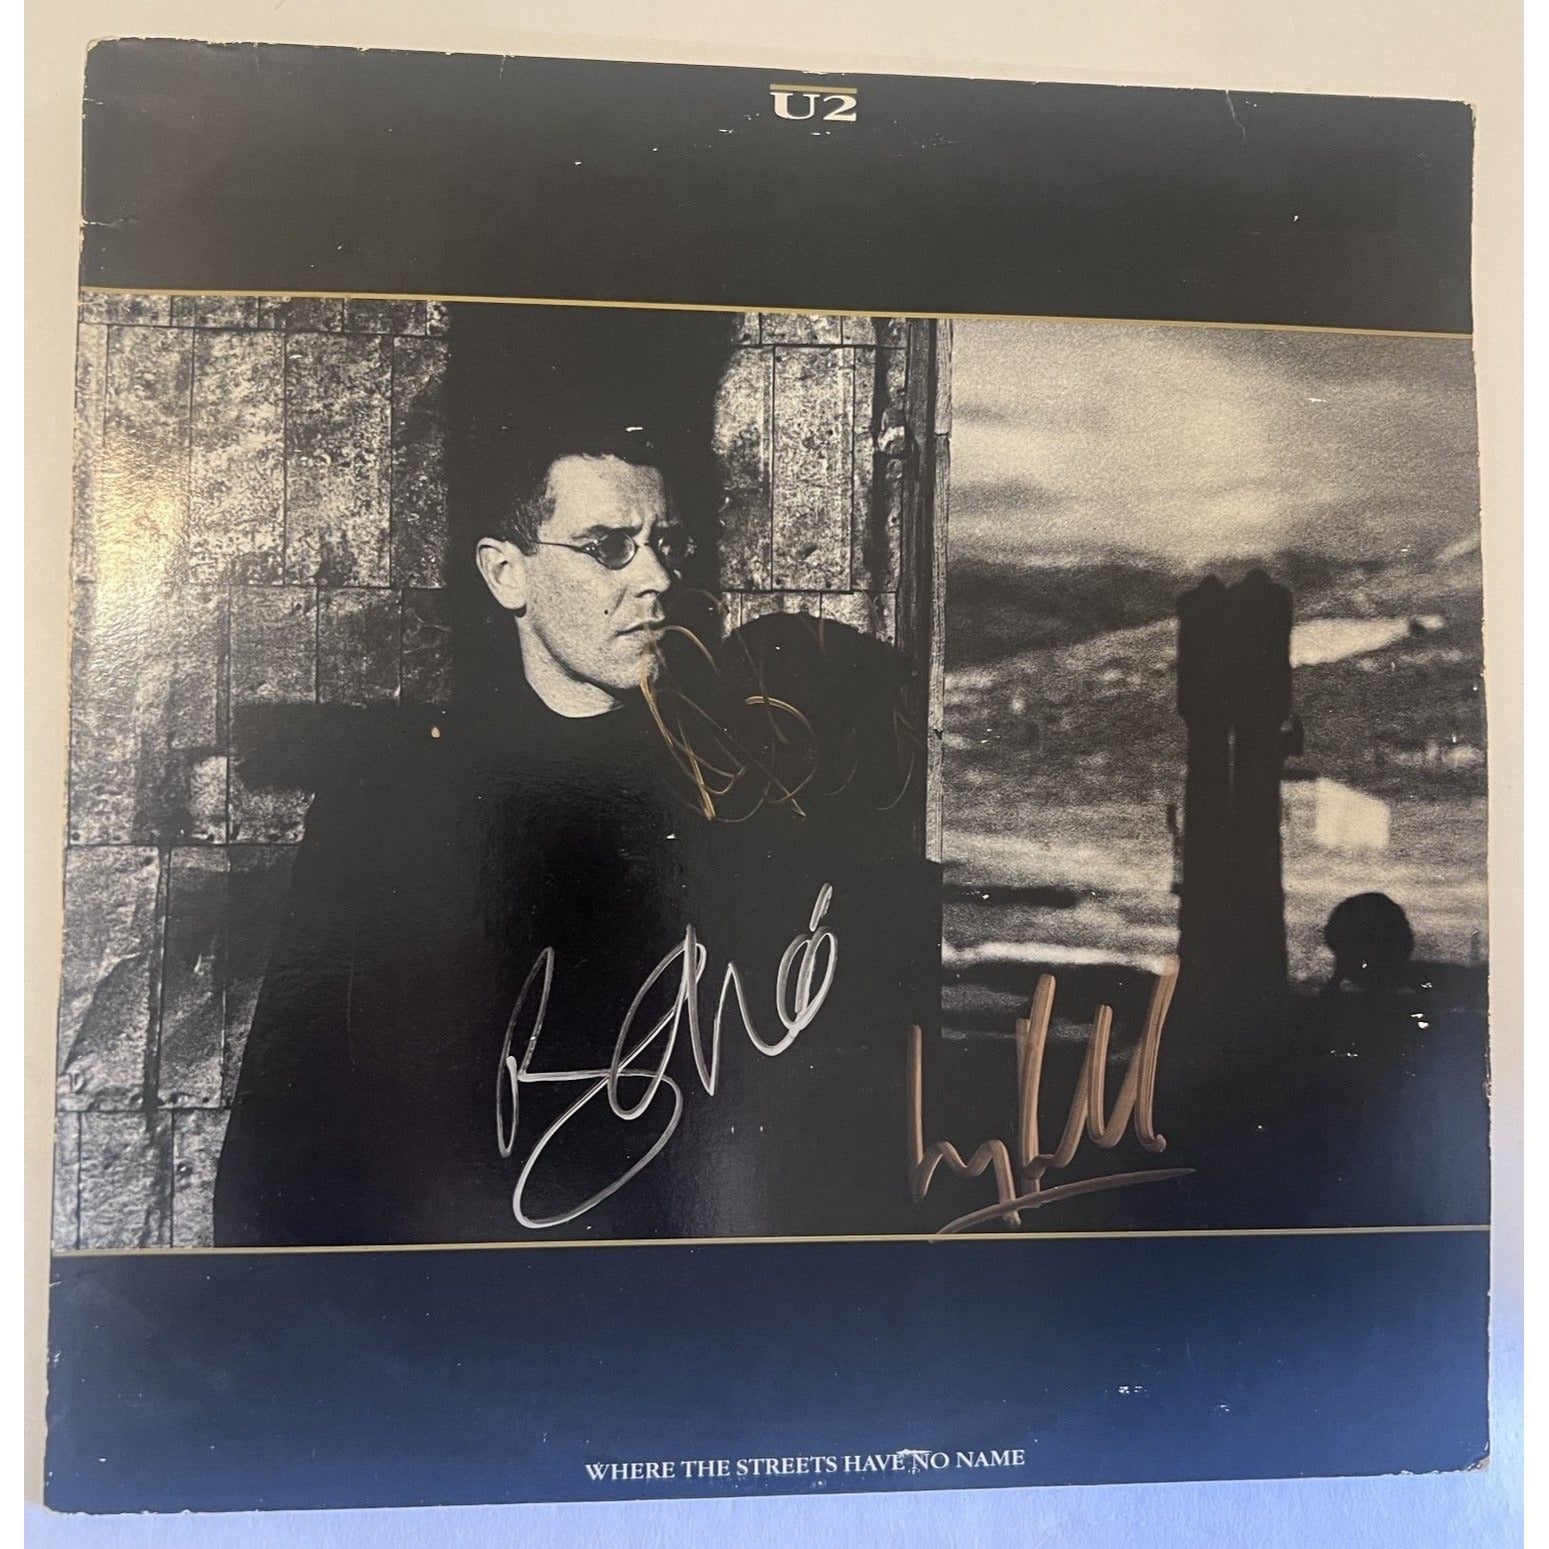 U2 "Where The Streets Have No Name" original LP Bono Larry Mullen signed with proof